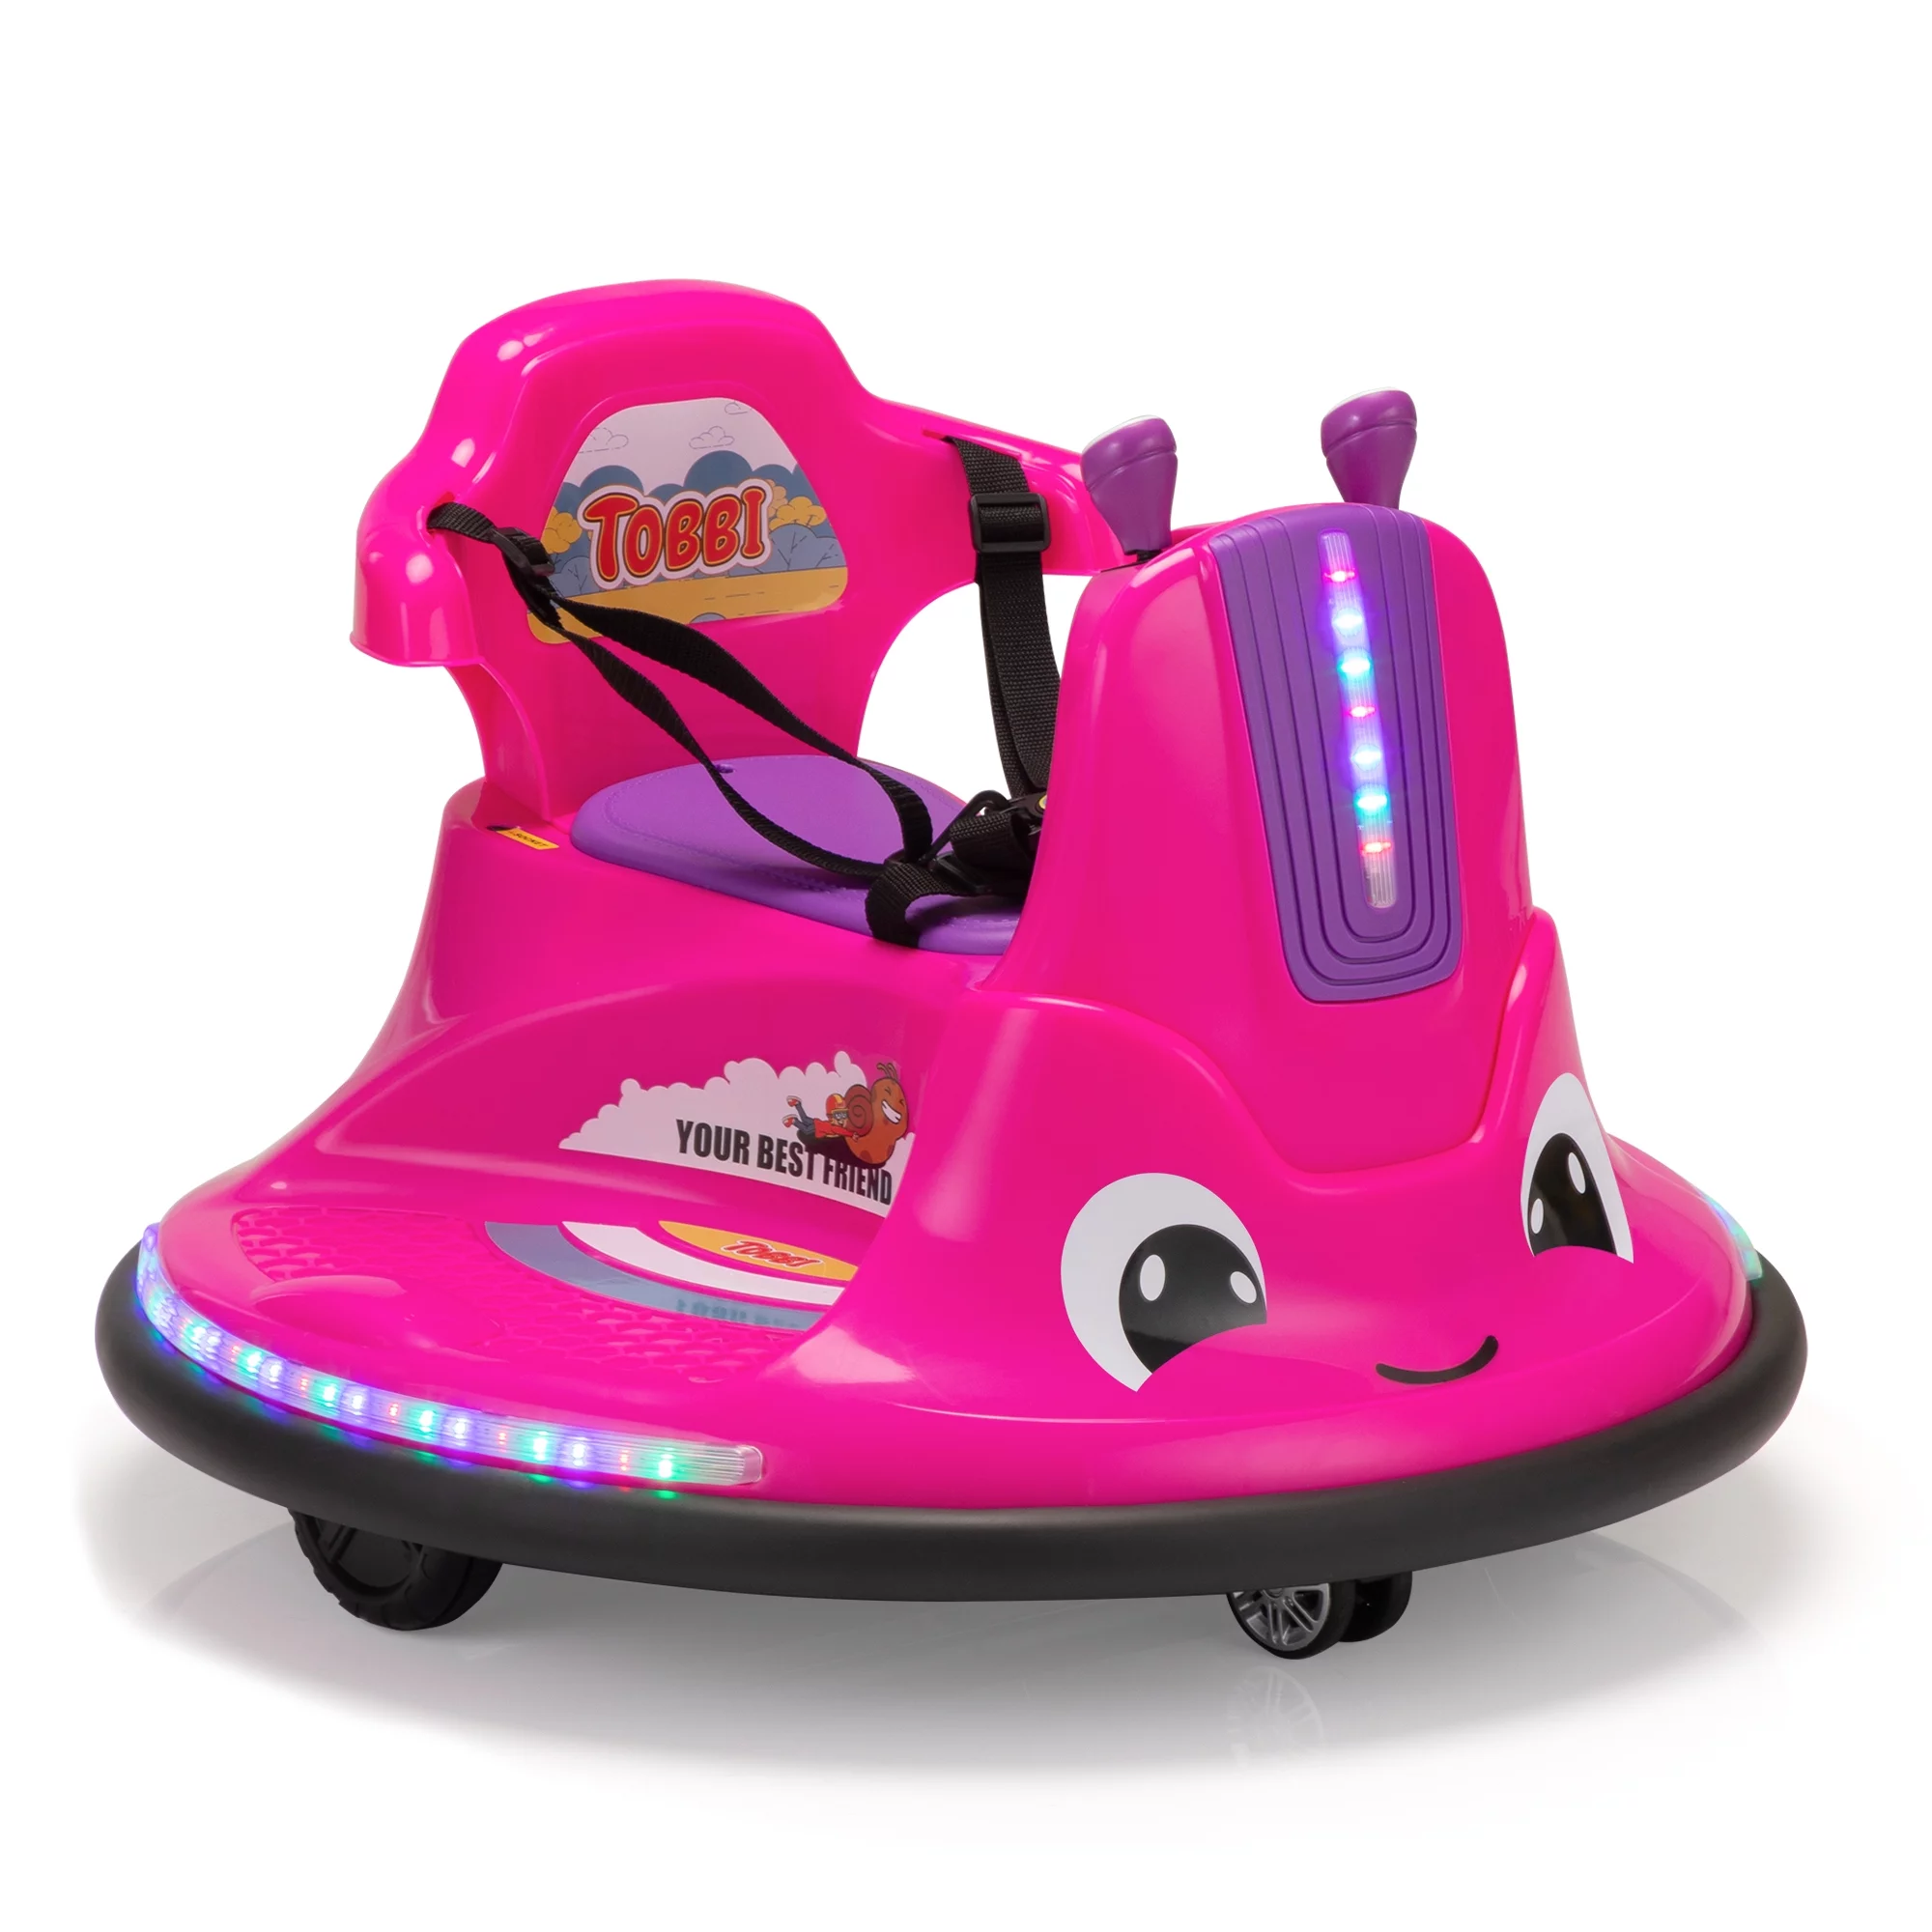 TOBBI 12V Bumper Car for Kids Toddlers Ride on Toys with Remote Control Music LED Lights 360 Degree Spin, Age 3-8, Rose Red